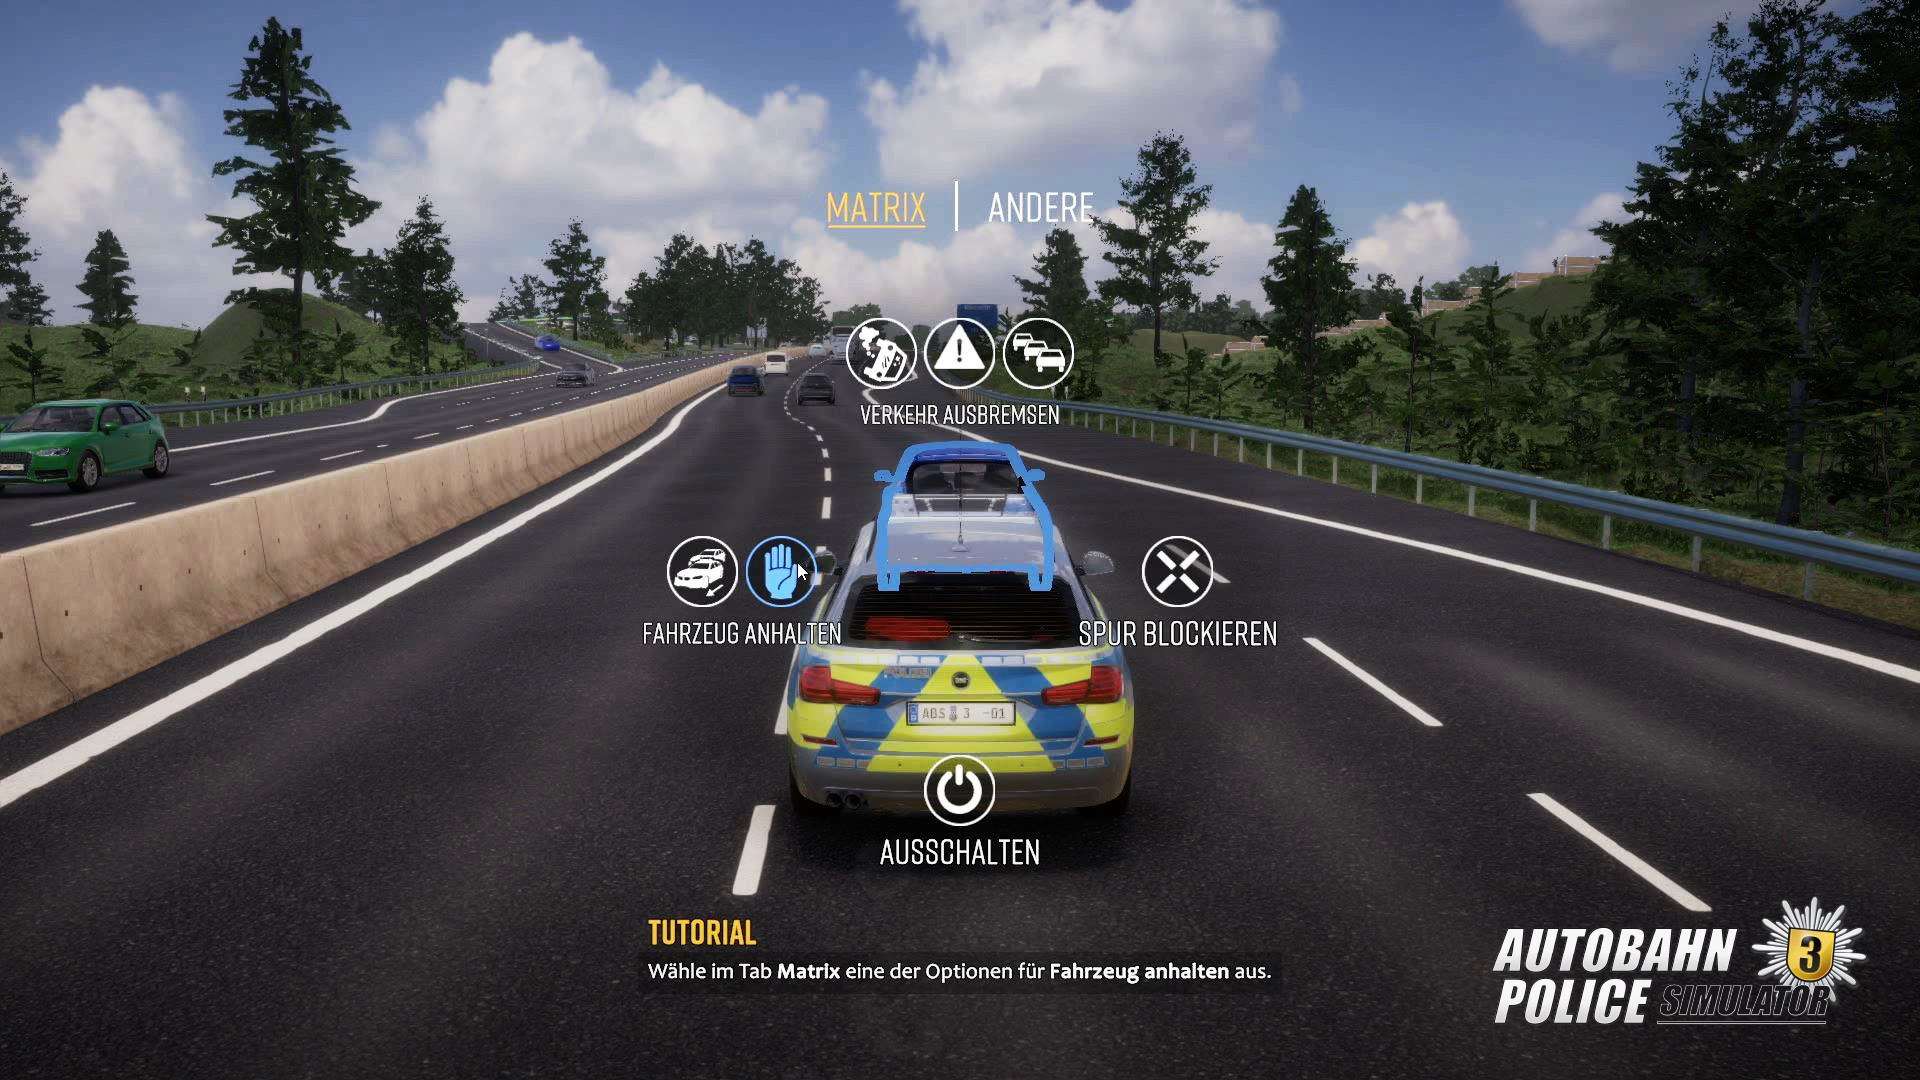 Autobahn Police Simulator 3 Free Download for PC